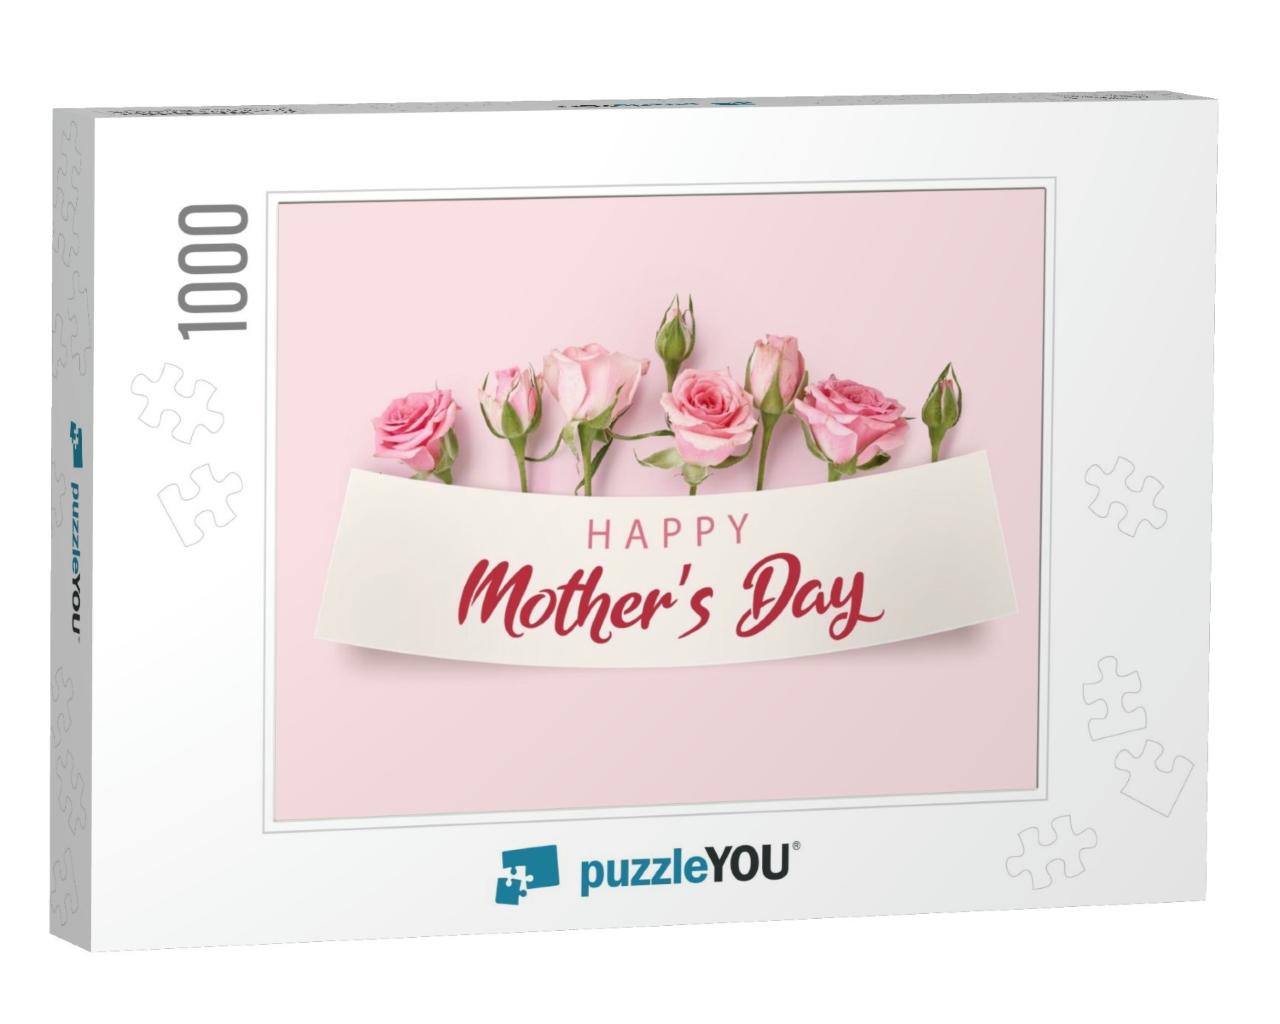 Mothers Day Greeting Card with Blossom Flowers. R... Jigsaw Puzzle with 1000 pieces